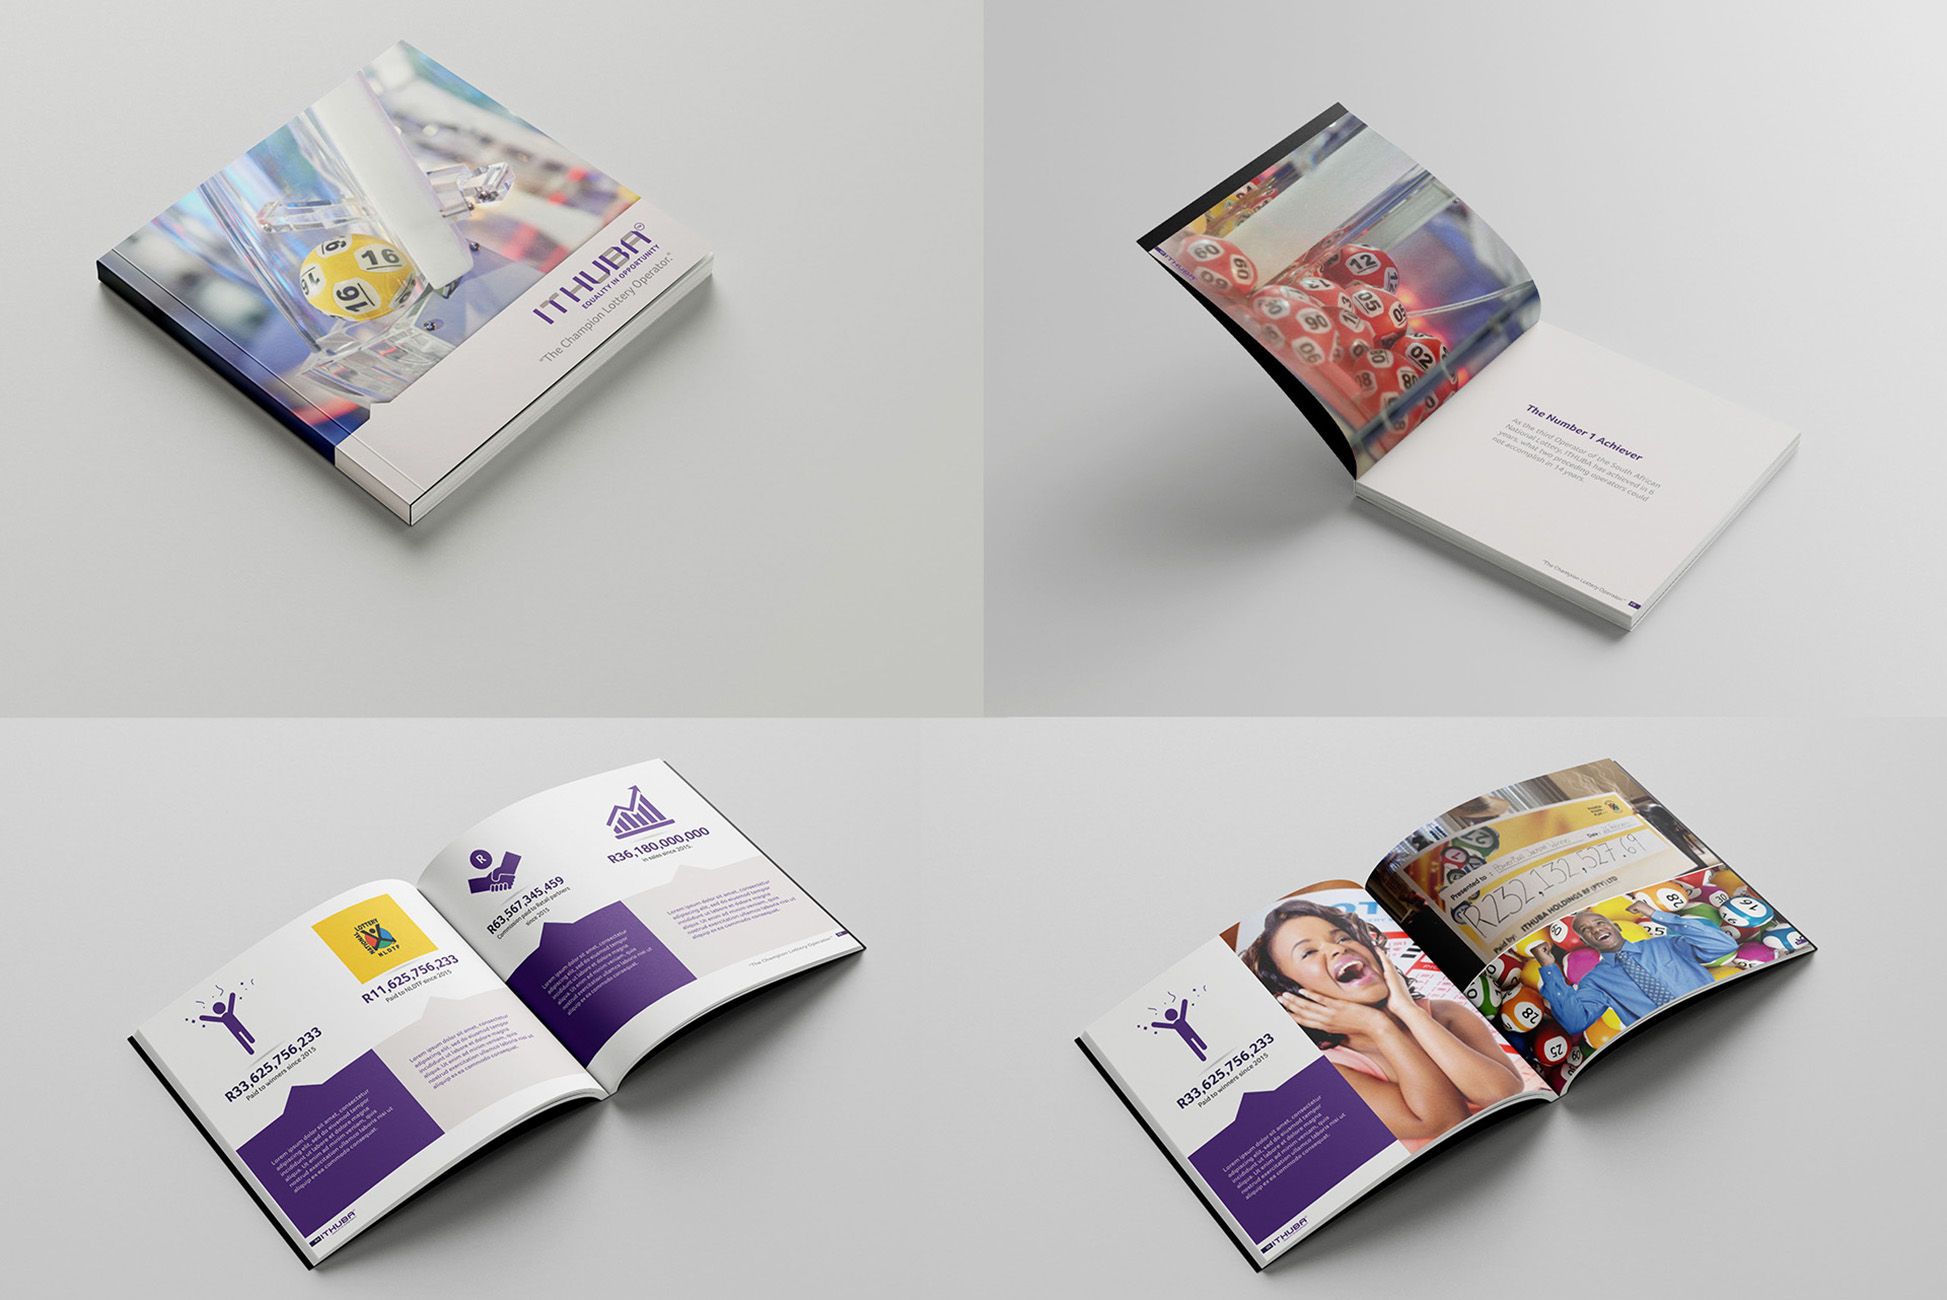 ITHUBA BRAG Book Design and Layout